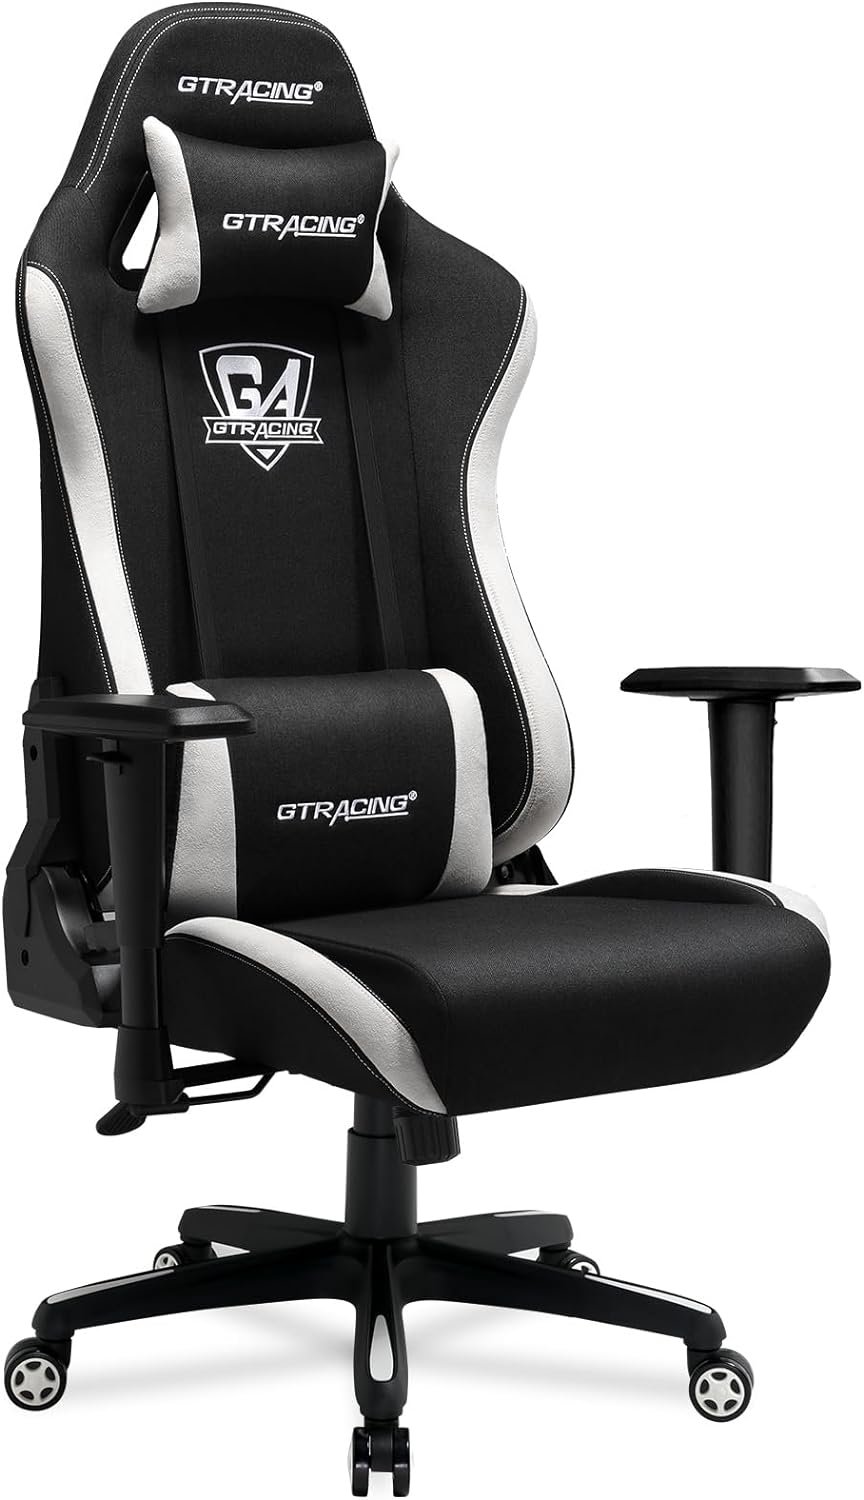 GTRACING Fabric Gaming Chair Review